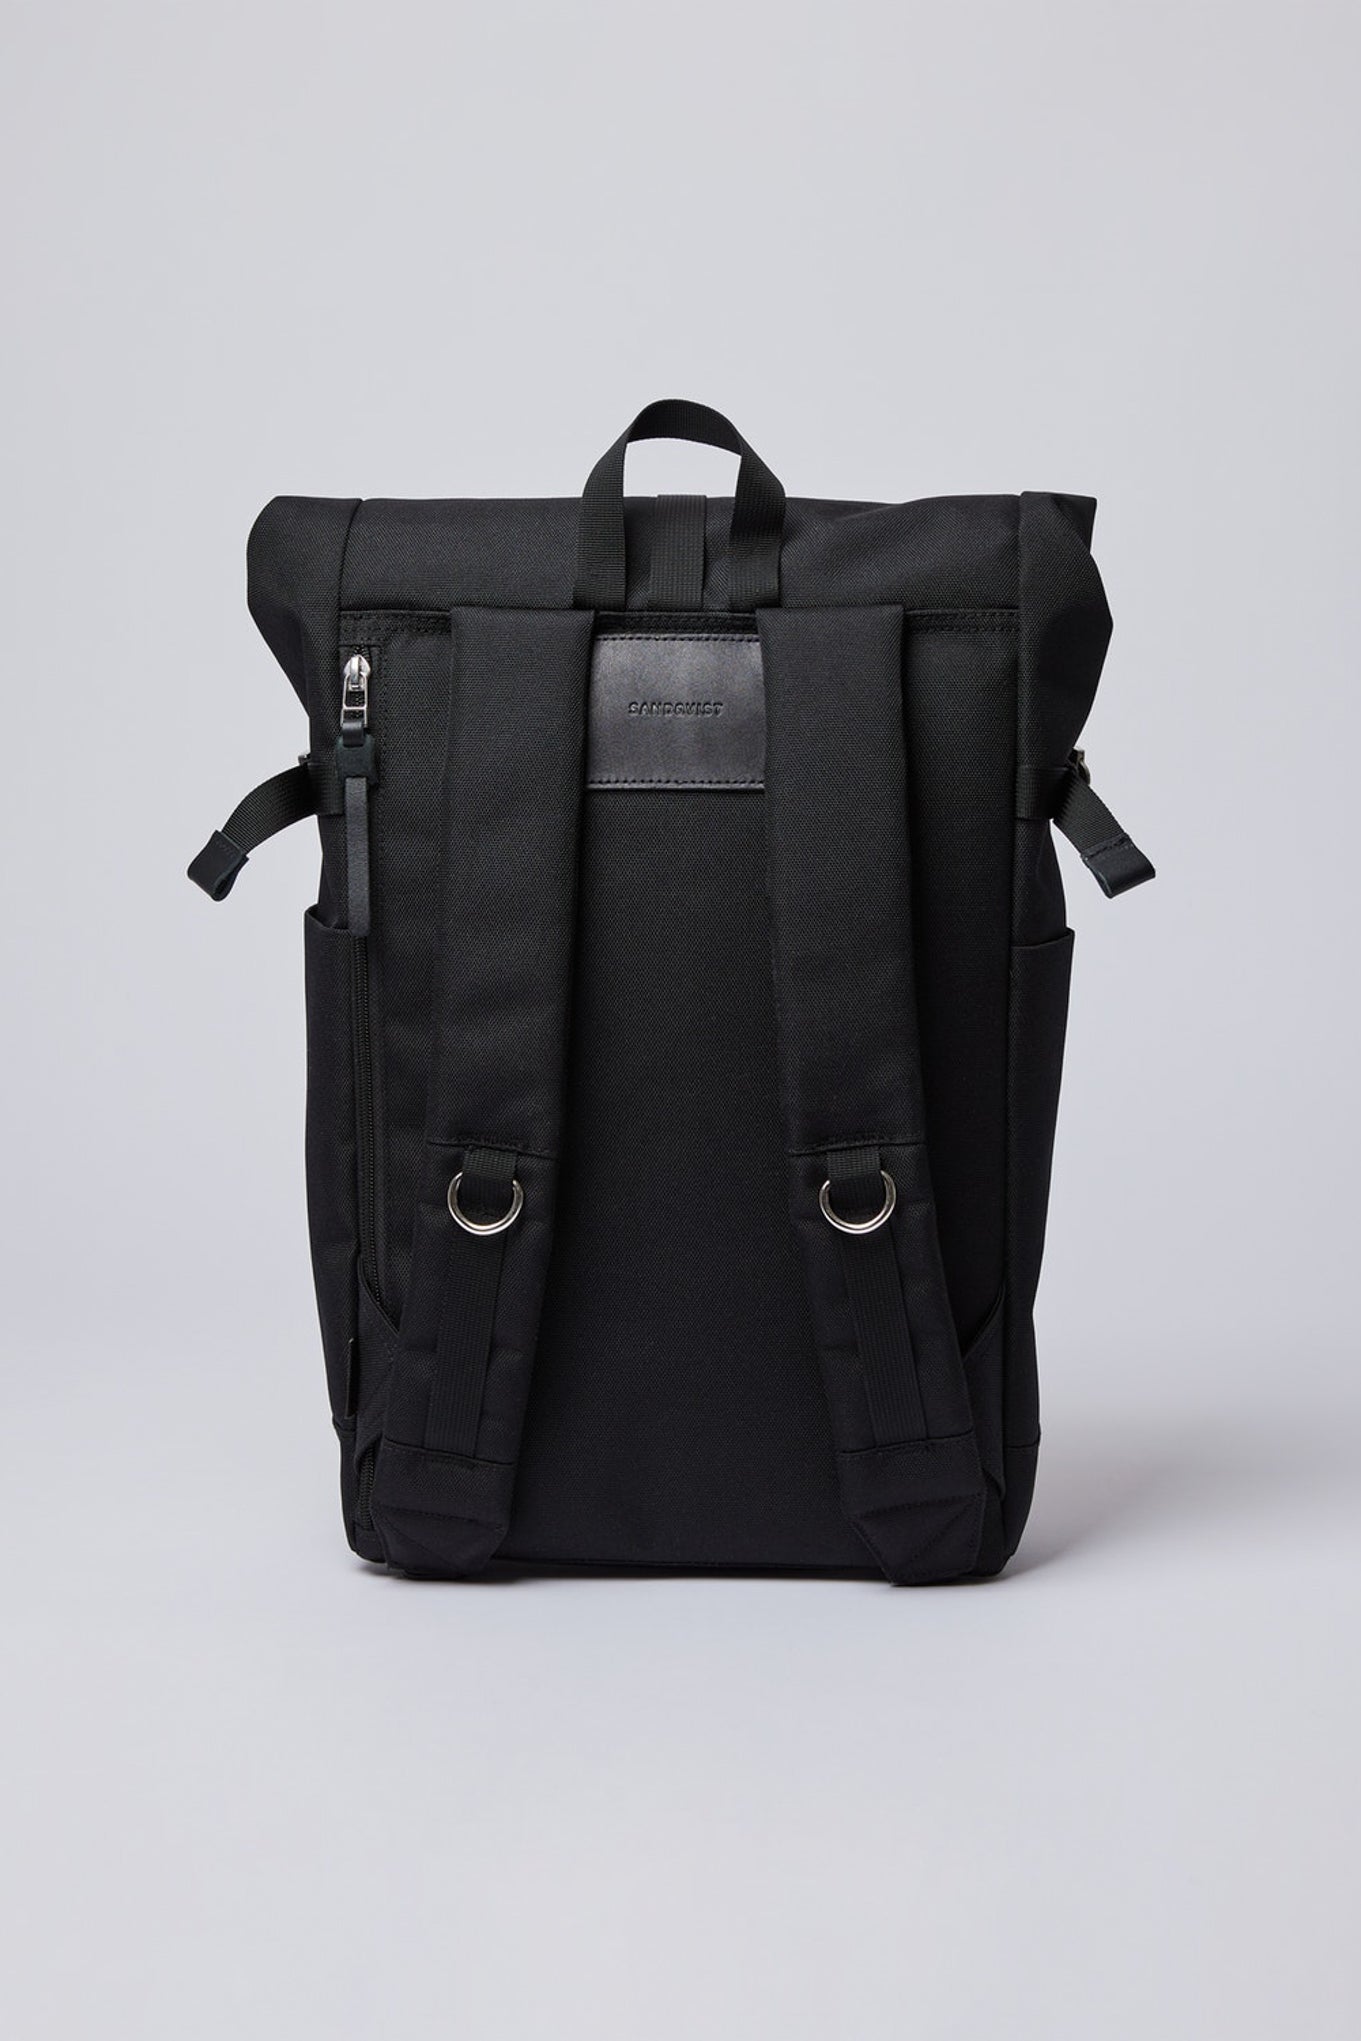 ILON Backpack black with black leather